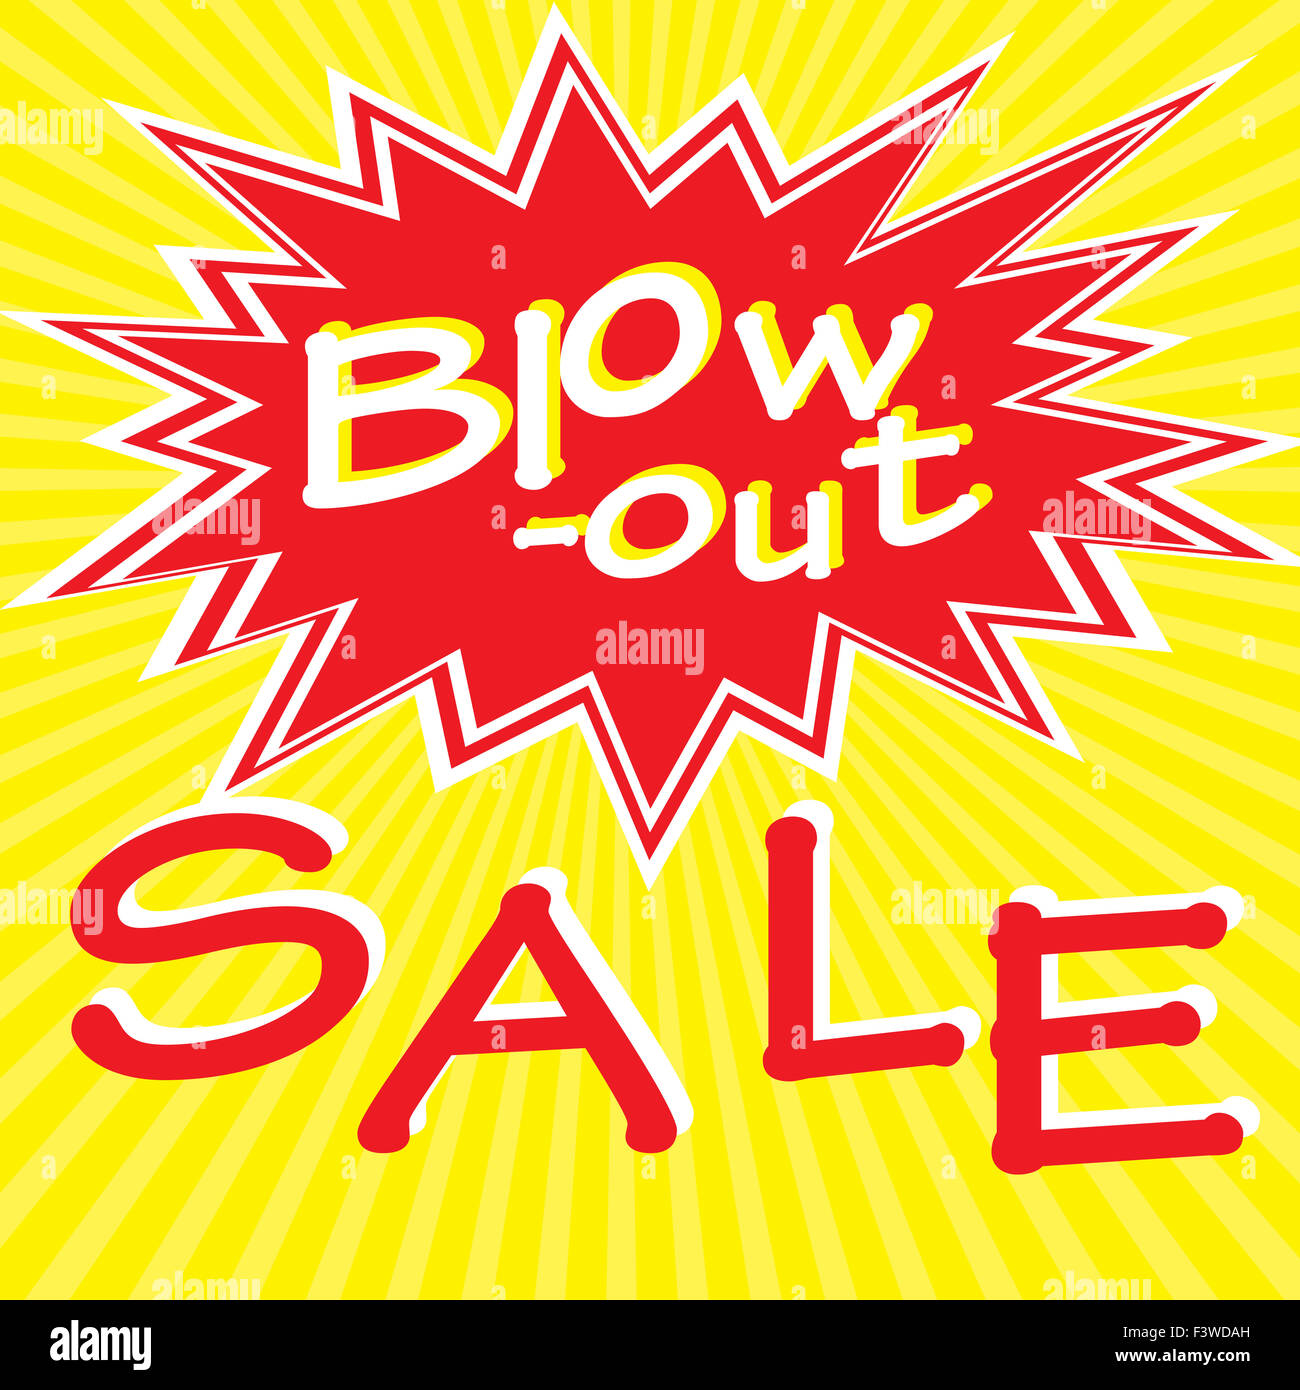 Blow-out Sale Stock Photo